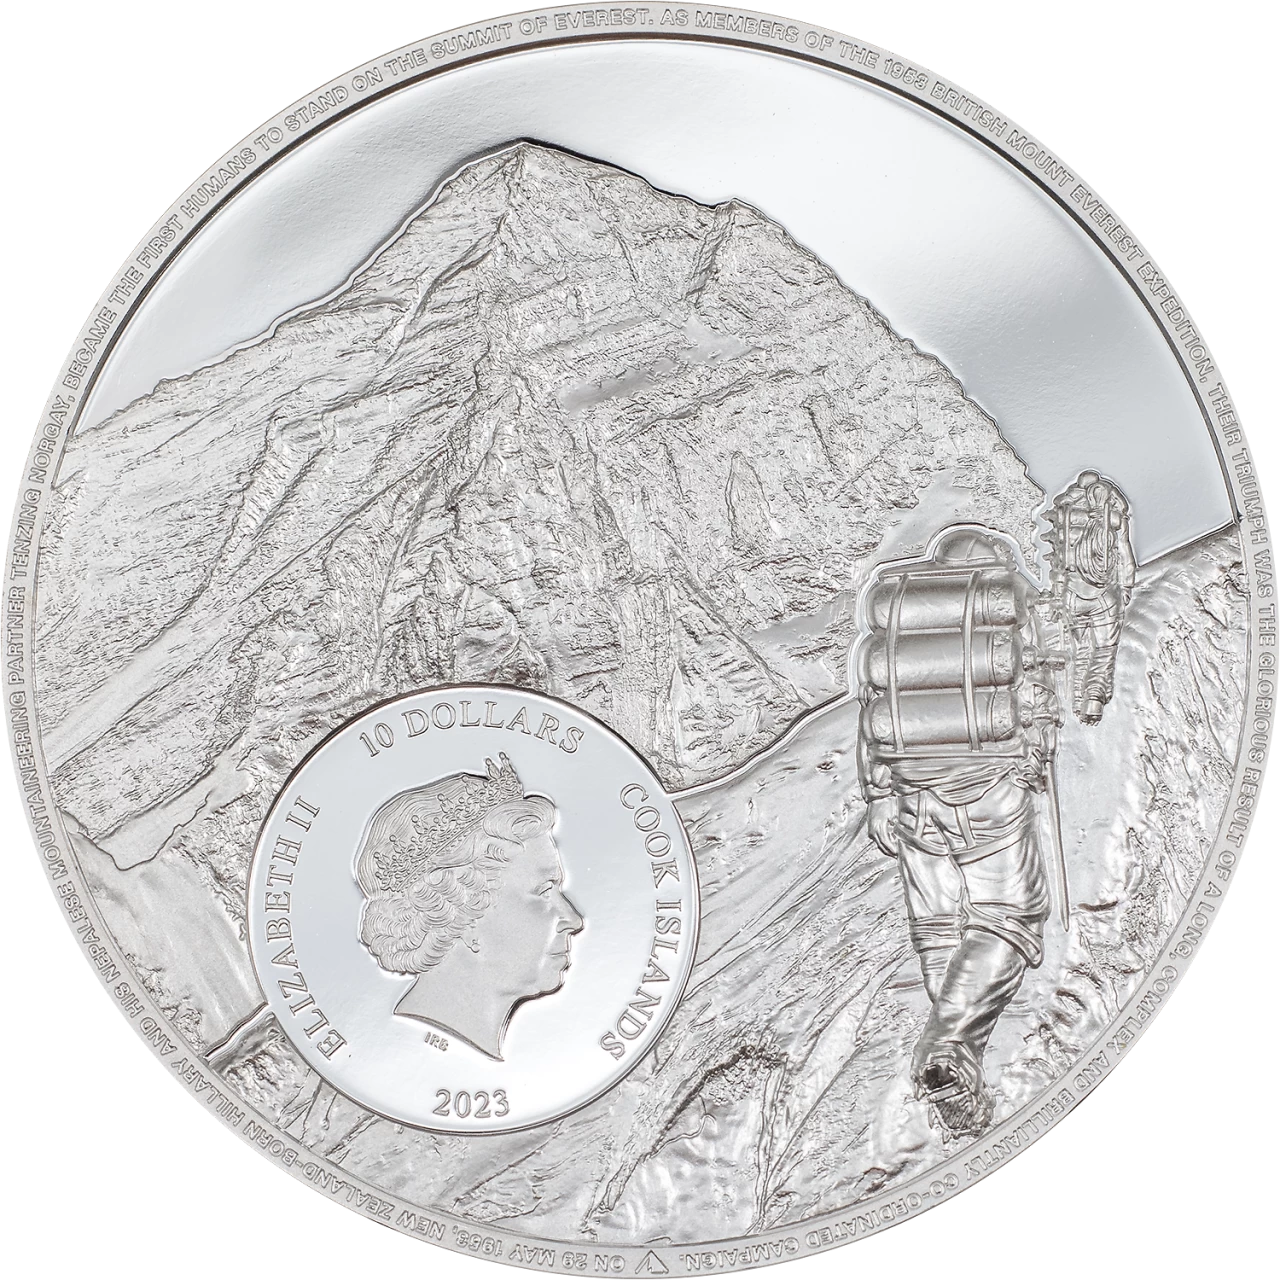 2023 Cook Island MOUNT EVEREST - FIRST ASCENT 2 oz Silver Coin - OZB